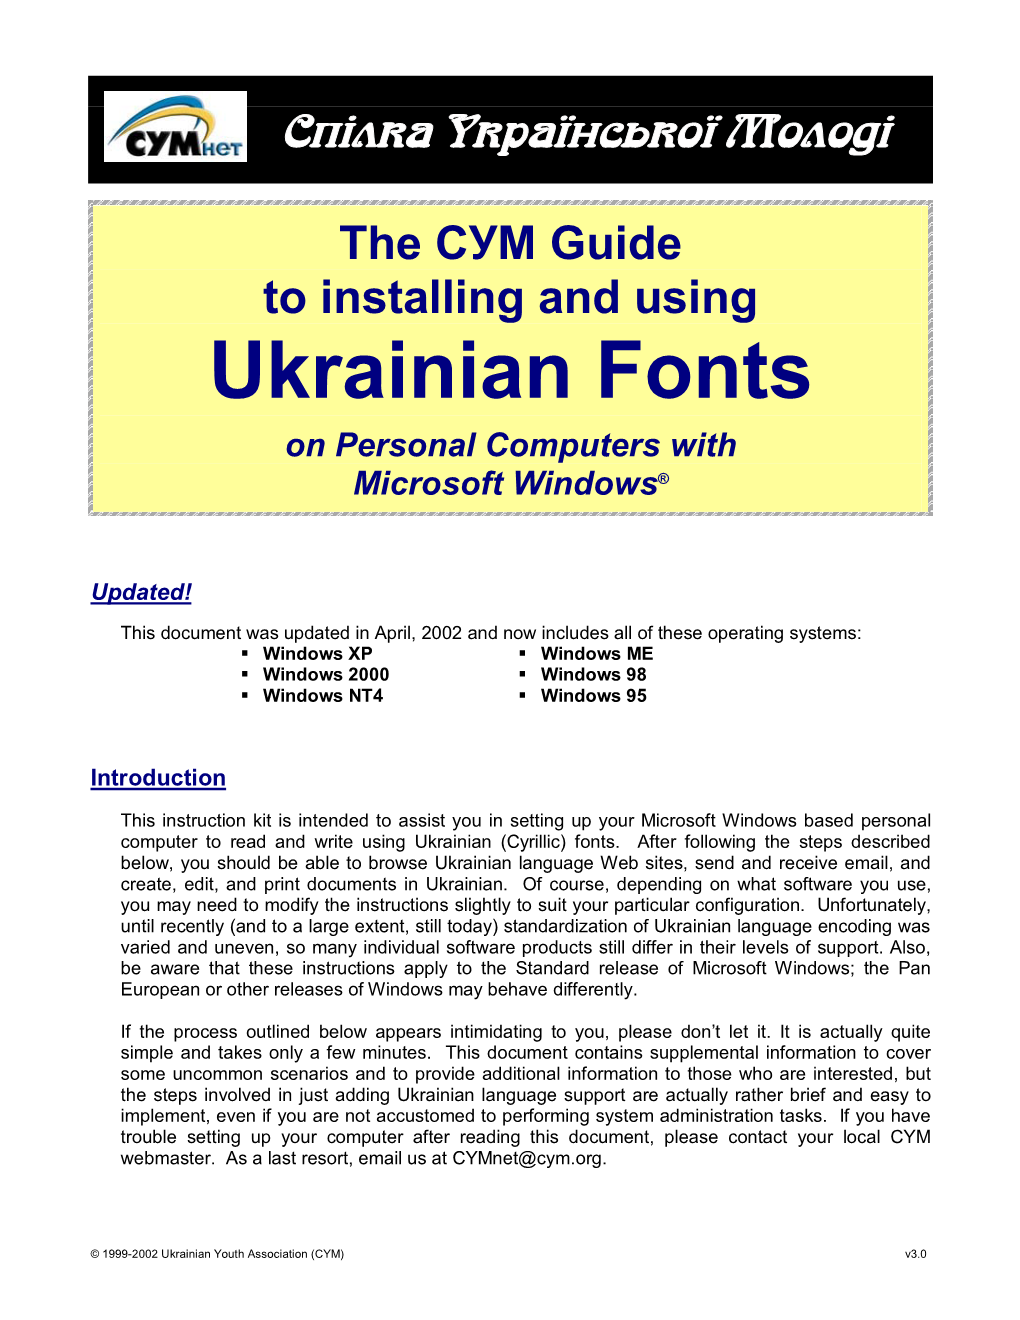 The CYM Guide to Installing and Using Ukrainian Fonts